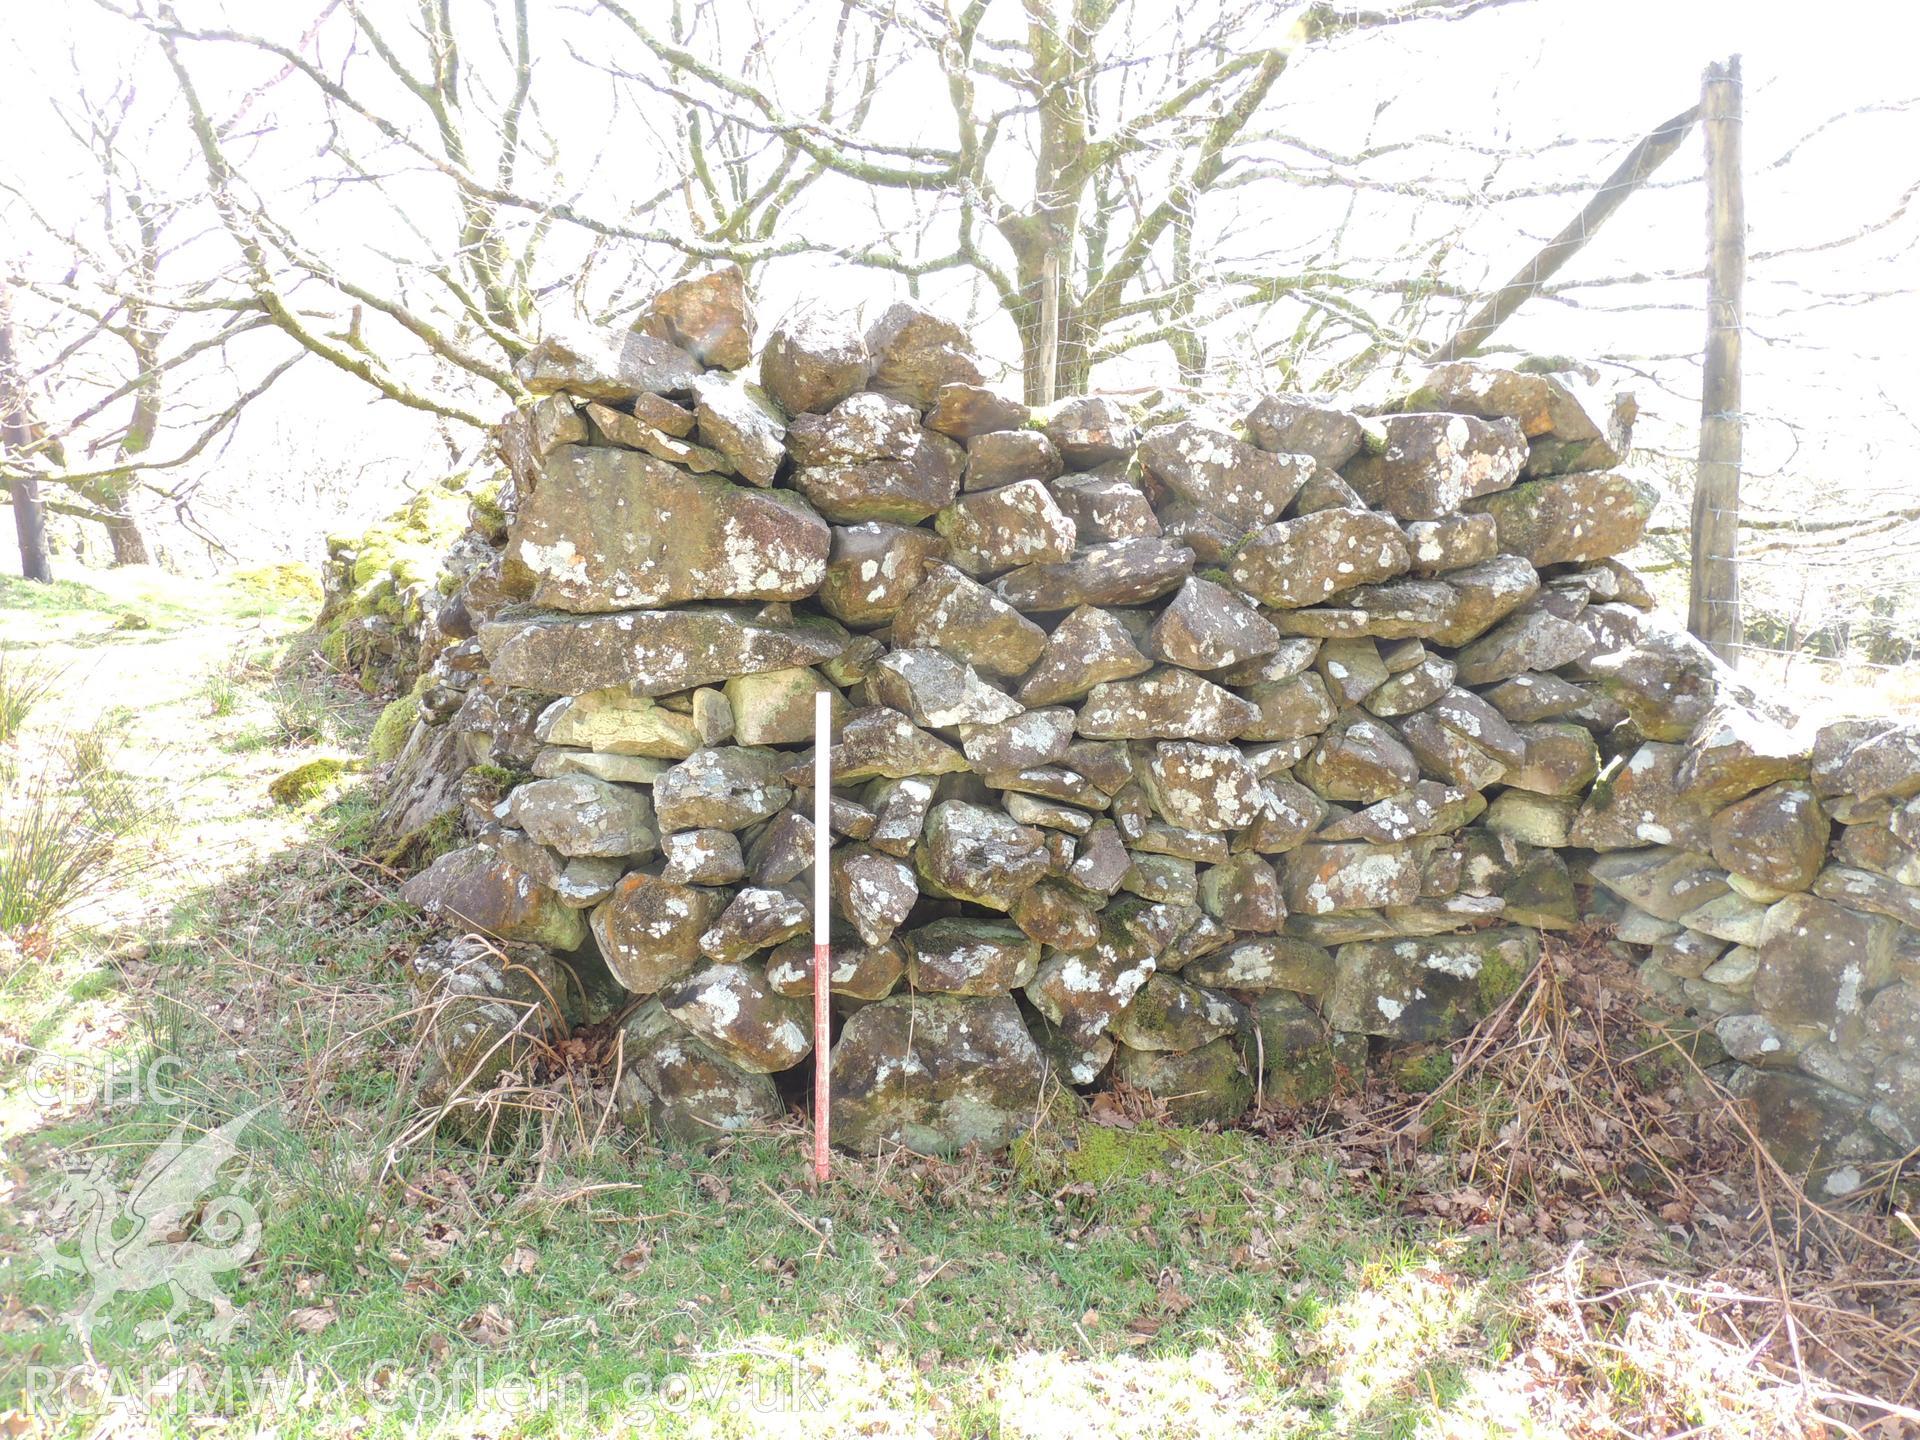 'Remains of structure, possibly sheep fold. Looking north west.' Photographed as part of desk based assessment and heritage impact assessment of a hydro scheme on the Afon Croesor, Brondanw Estate, Gwynedd. Produced by Archaeology Wales, 2018.